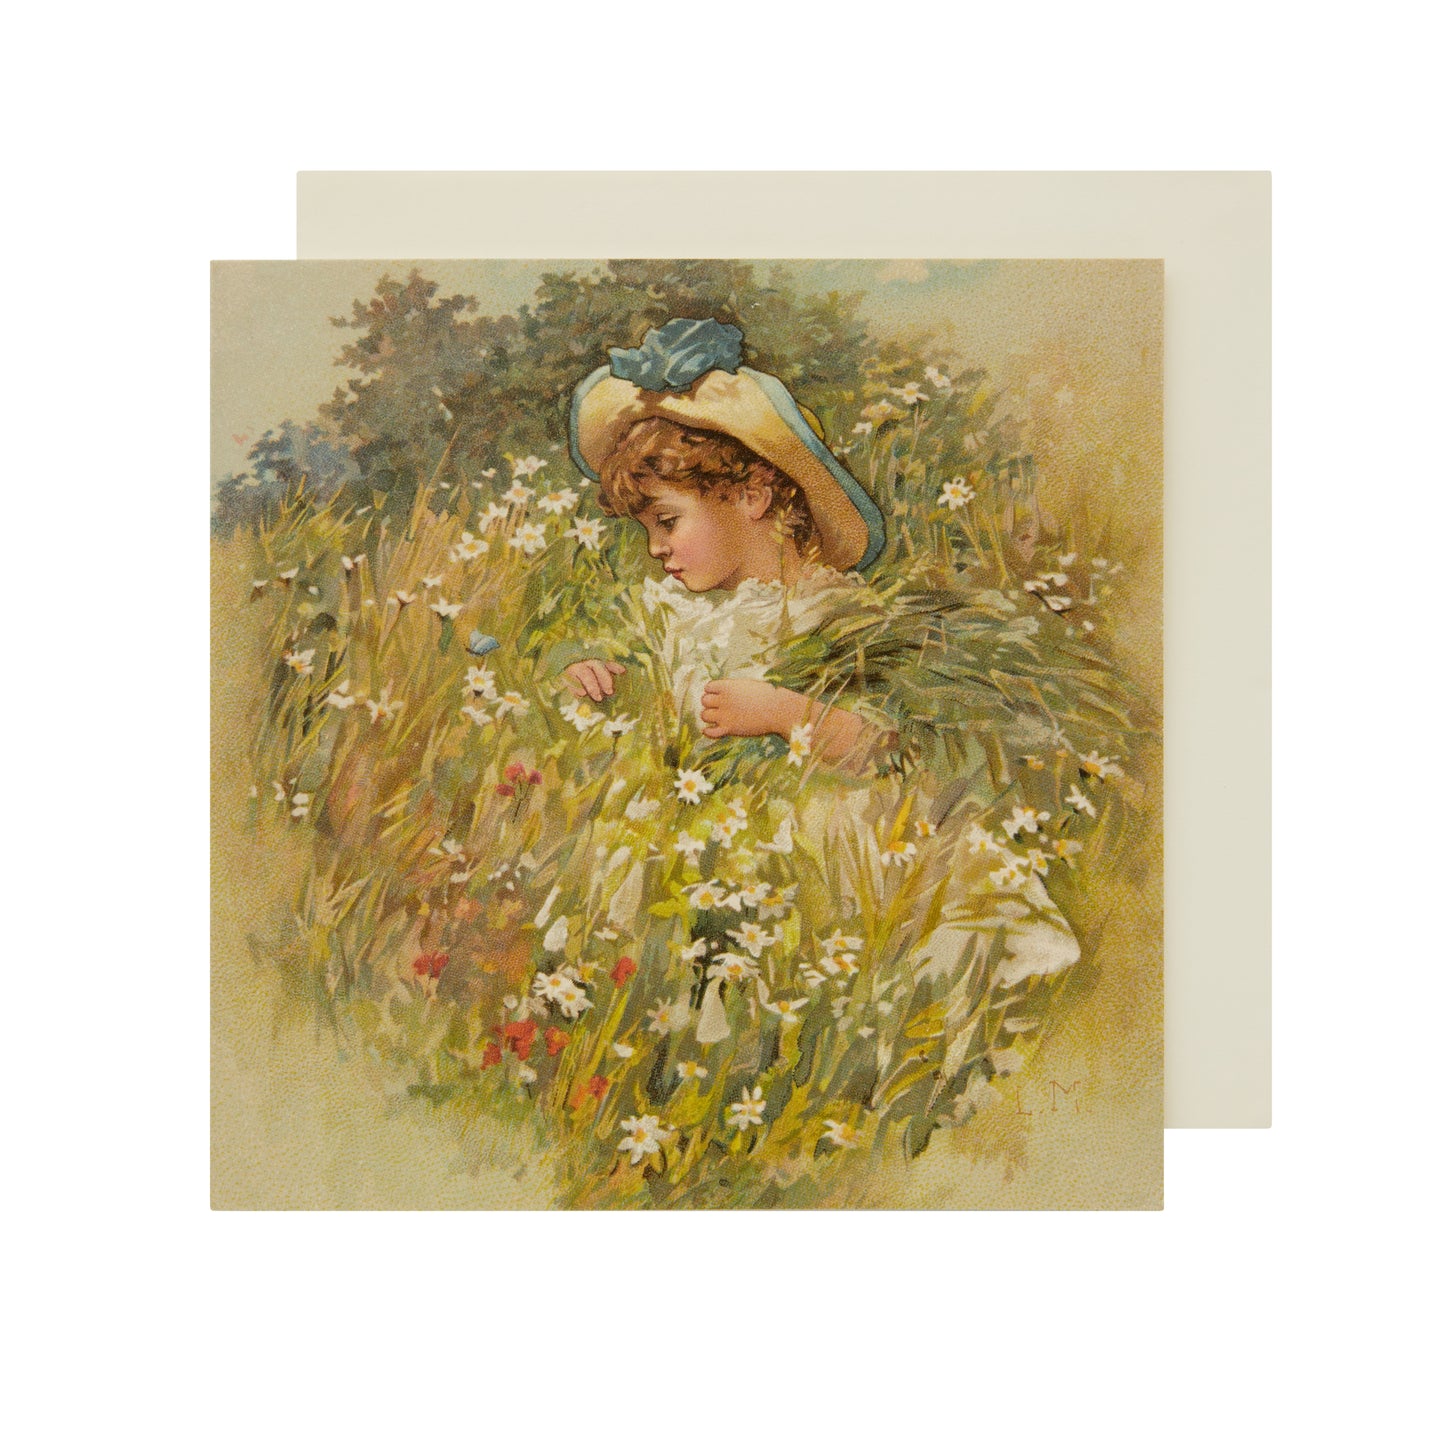 Square greeting card with illustration of a girl amongst grasses and meadow flowers. Brought to you by CuratingCambridge.co.uk